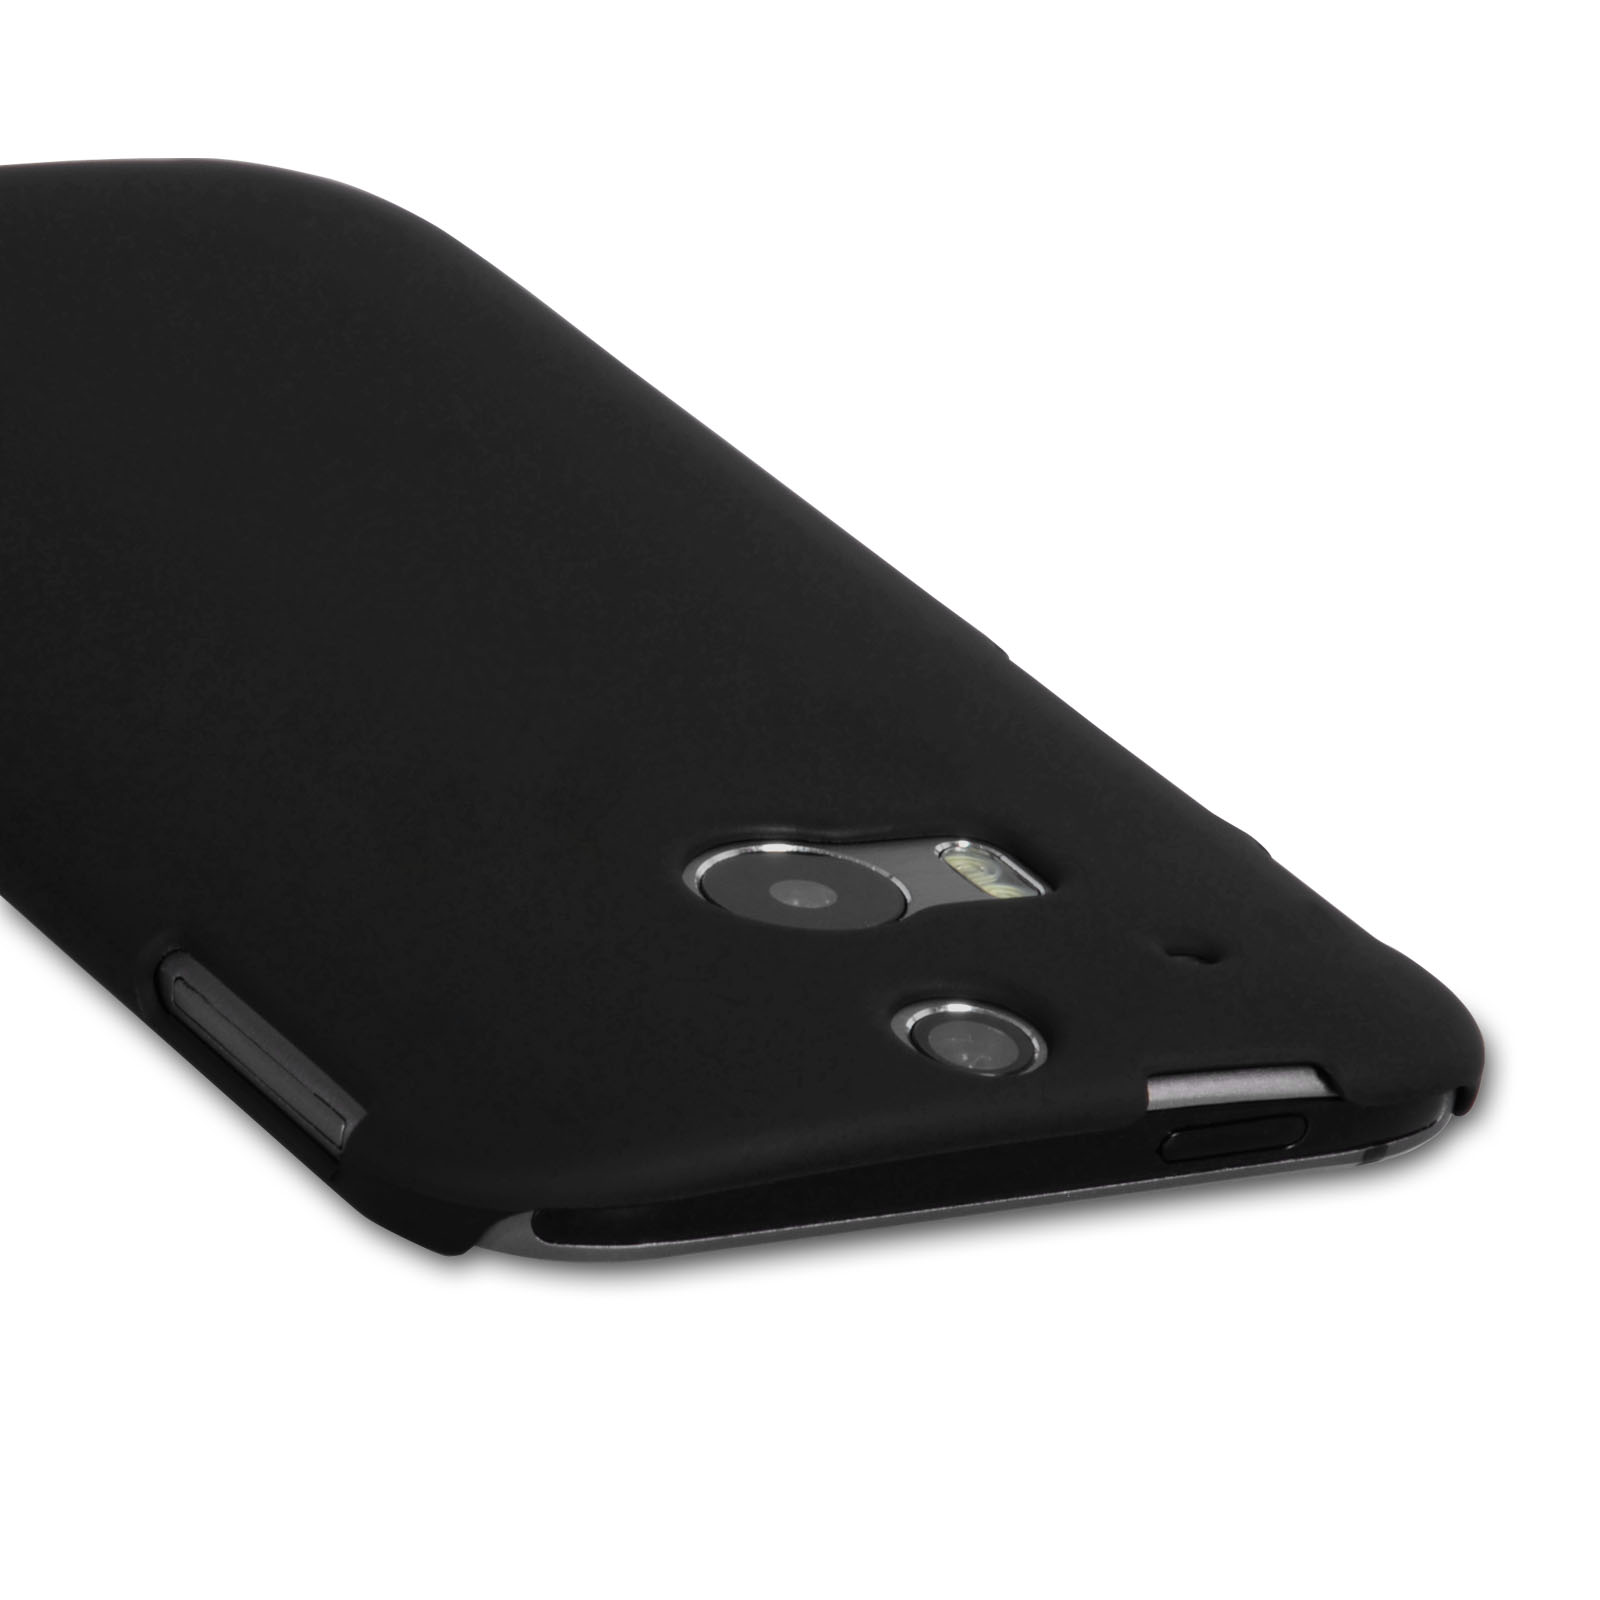 Yousave Accessories Htc One M8 Hard Hybrid Case Black